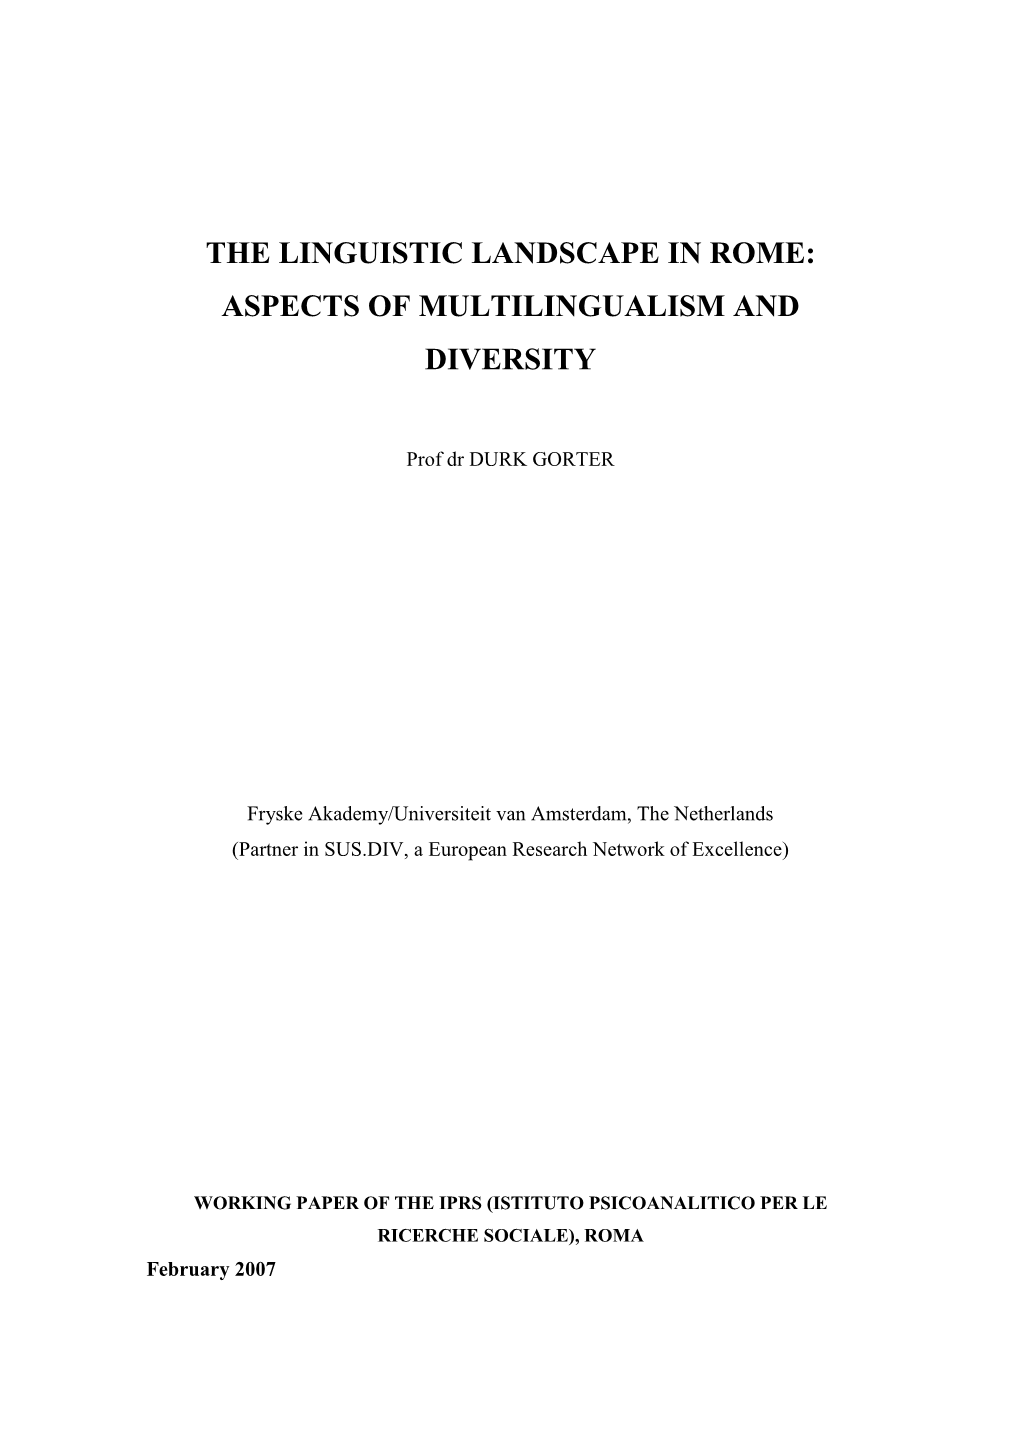 The Linguistic Landscape in Rome: Aspects of Multilingualism and Diversity